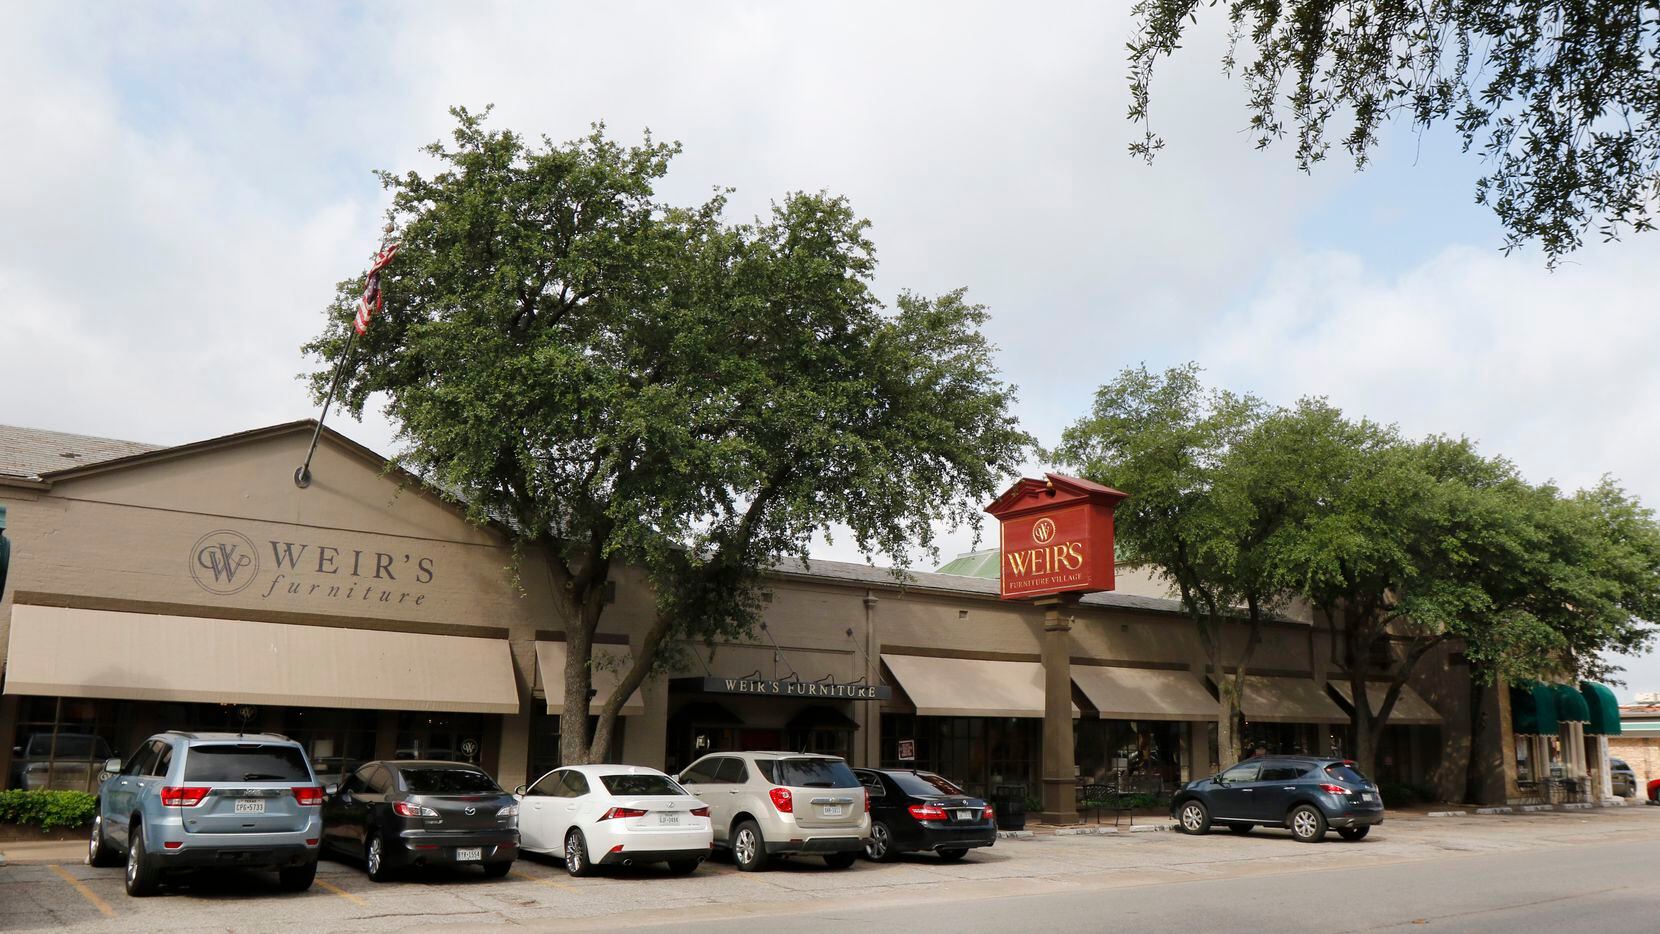 Weir S Furniture Looks To Spruce Up Its Longtime Home On Dallas